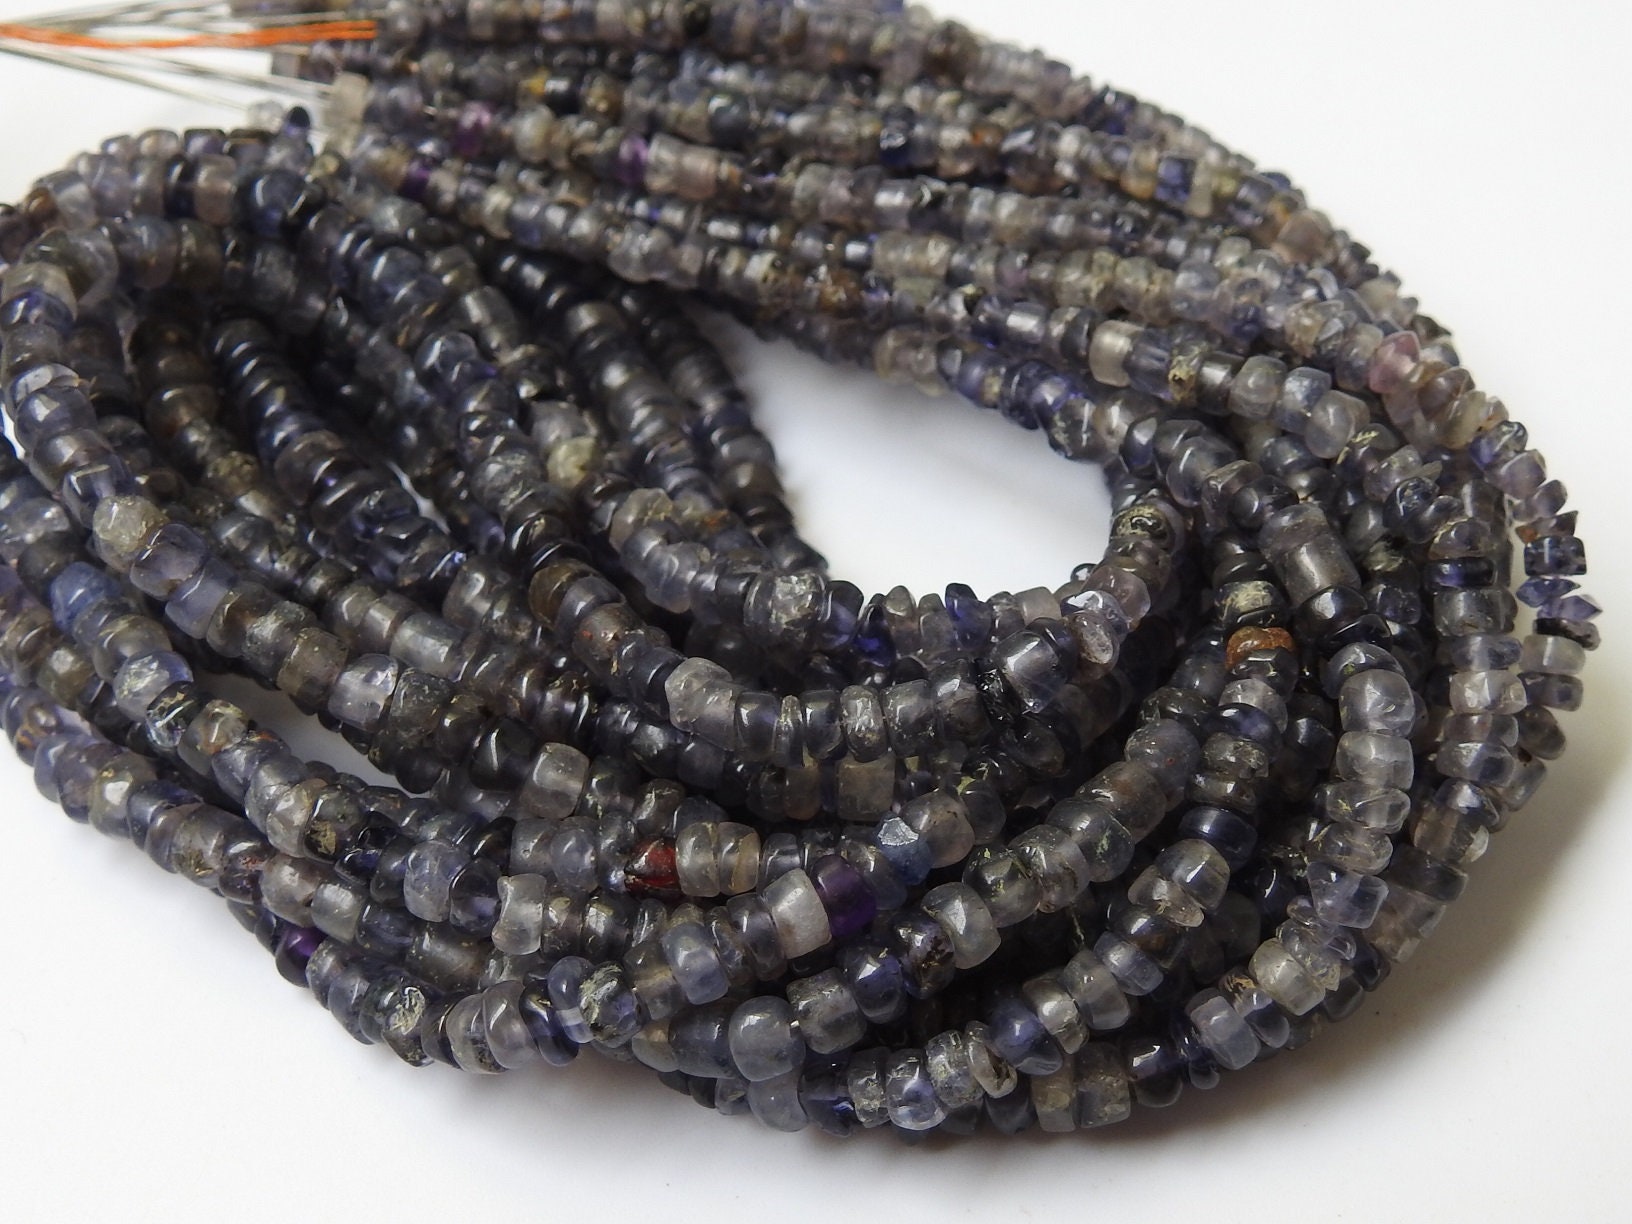 Natural Blue Iolite Smooth Handmade Beads,Roundel Shape,Loose Stone,For Making Jewelry,Wholesale Price,New Arrival,16Inch Strand B10 | Save 33% - Rajasthan Living 14